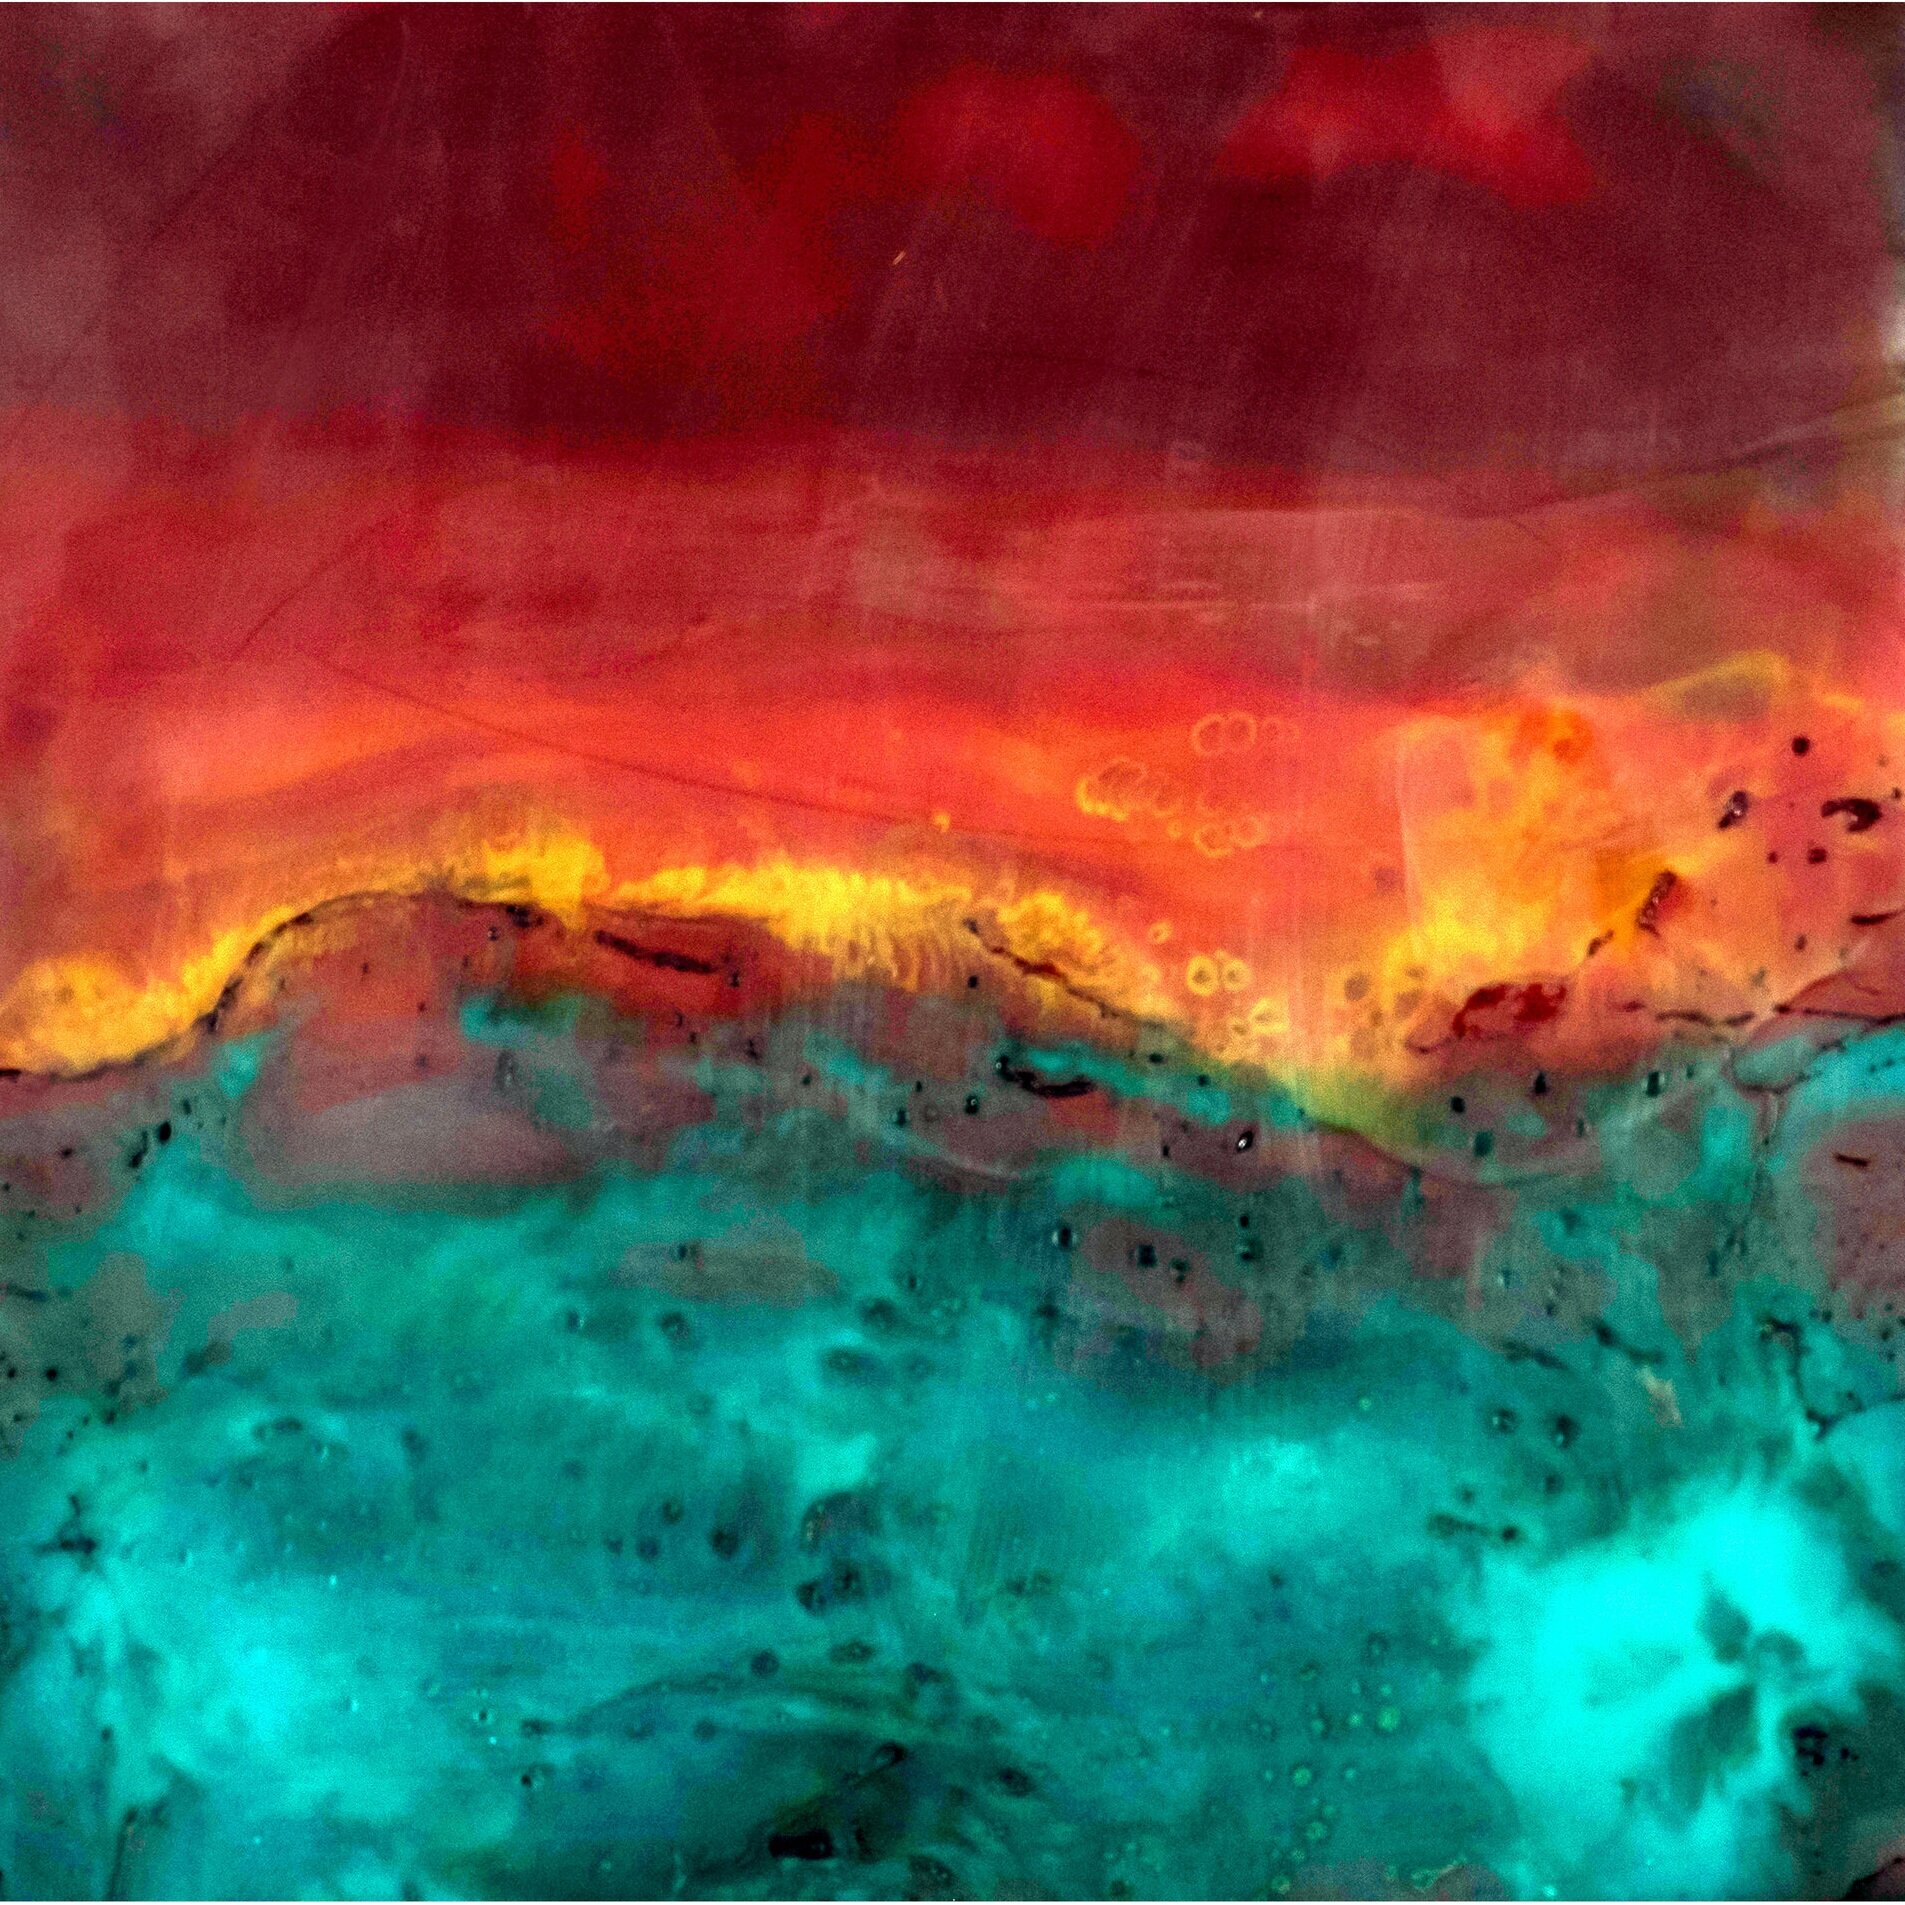 History of Encaustic and Wax Painting